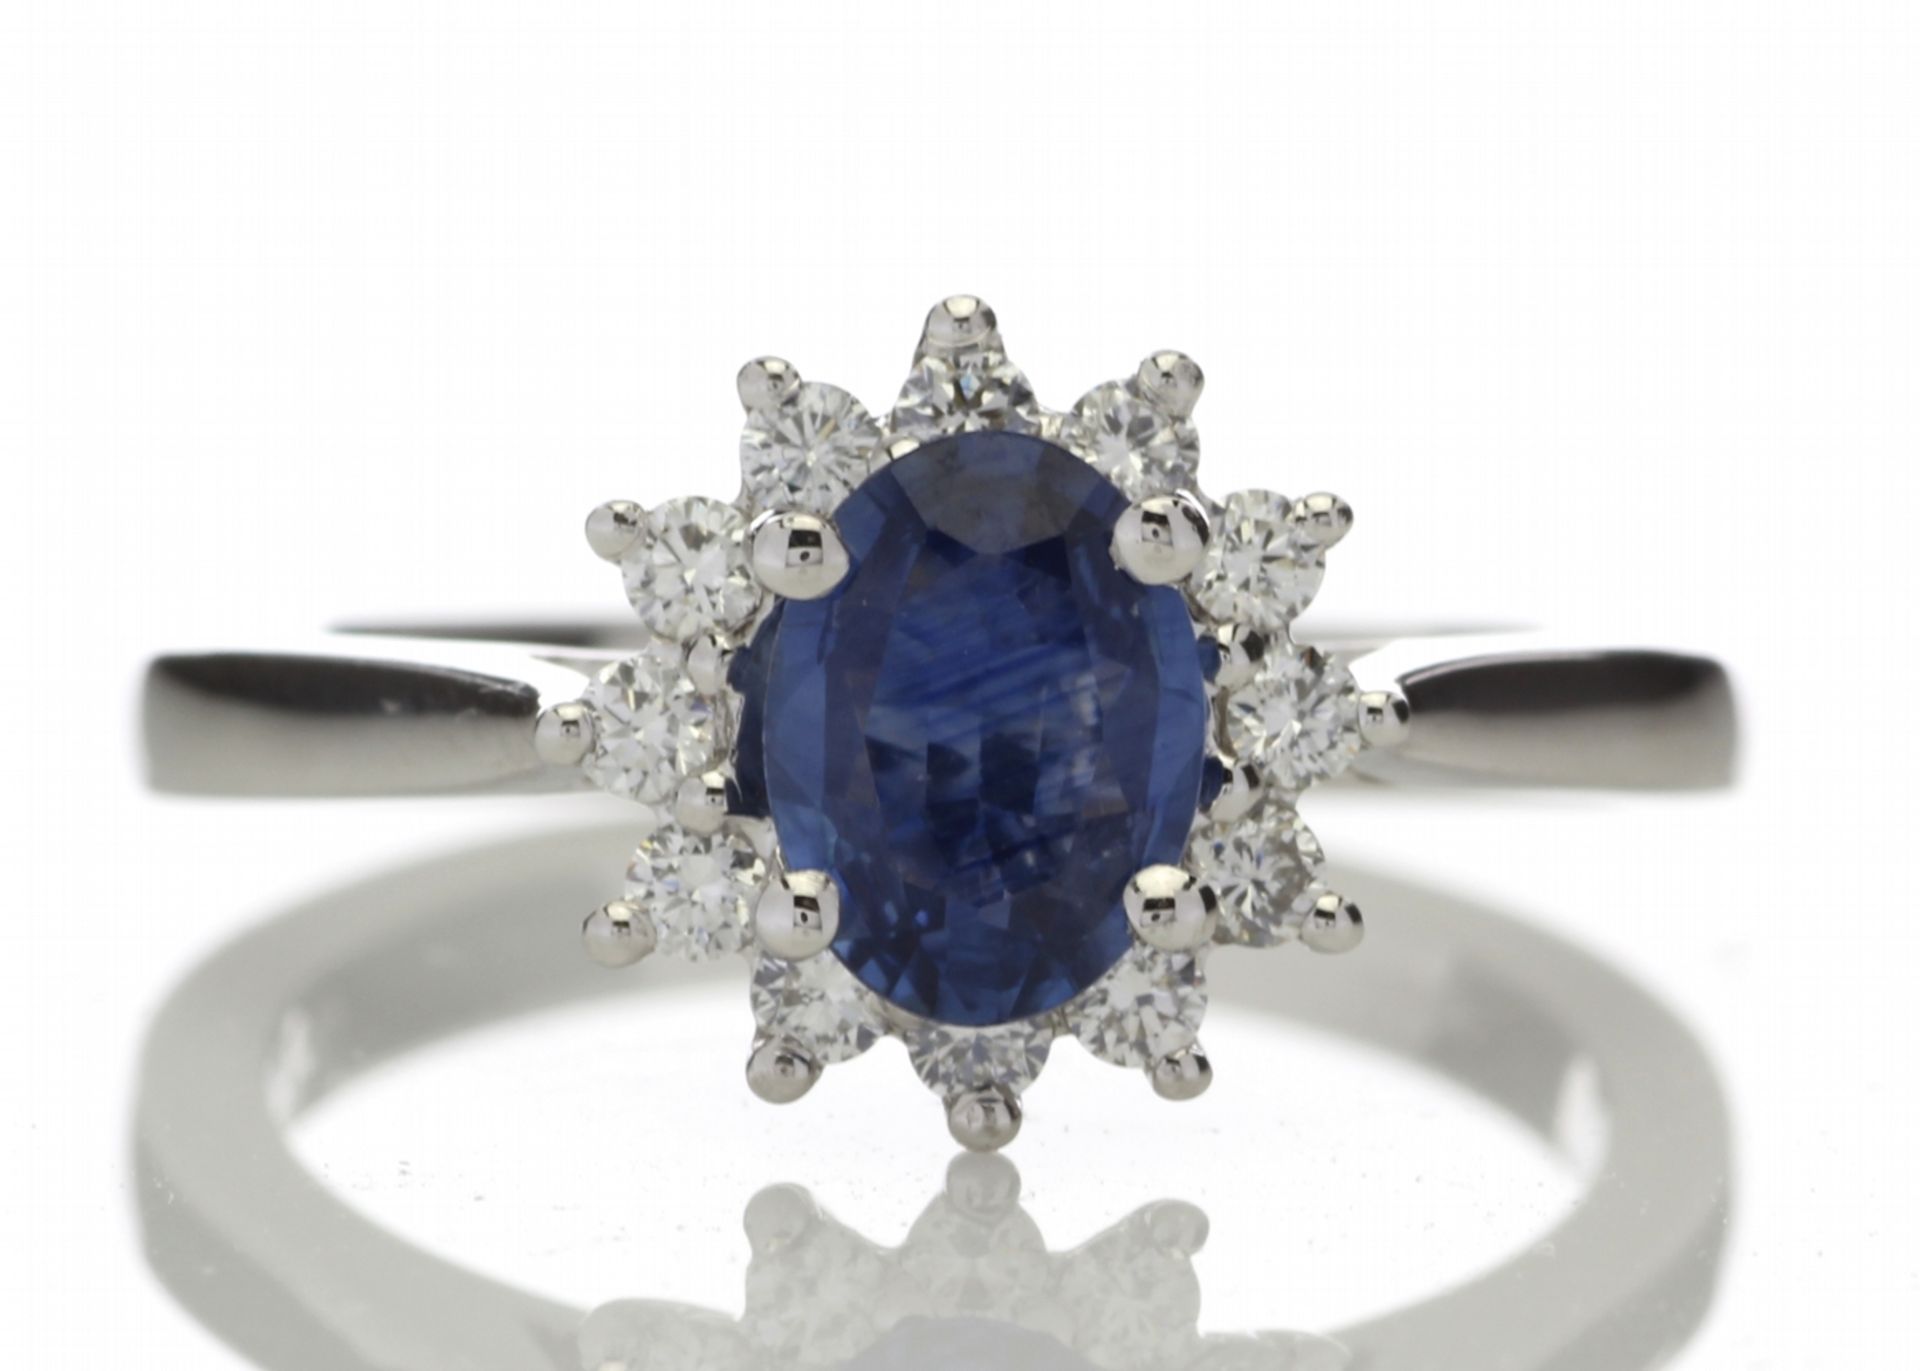 18ct White Gold Diamond And Sapphire Cluster Ring 0.25 Carats - Valued By GIE £6,980.00 - Classic